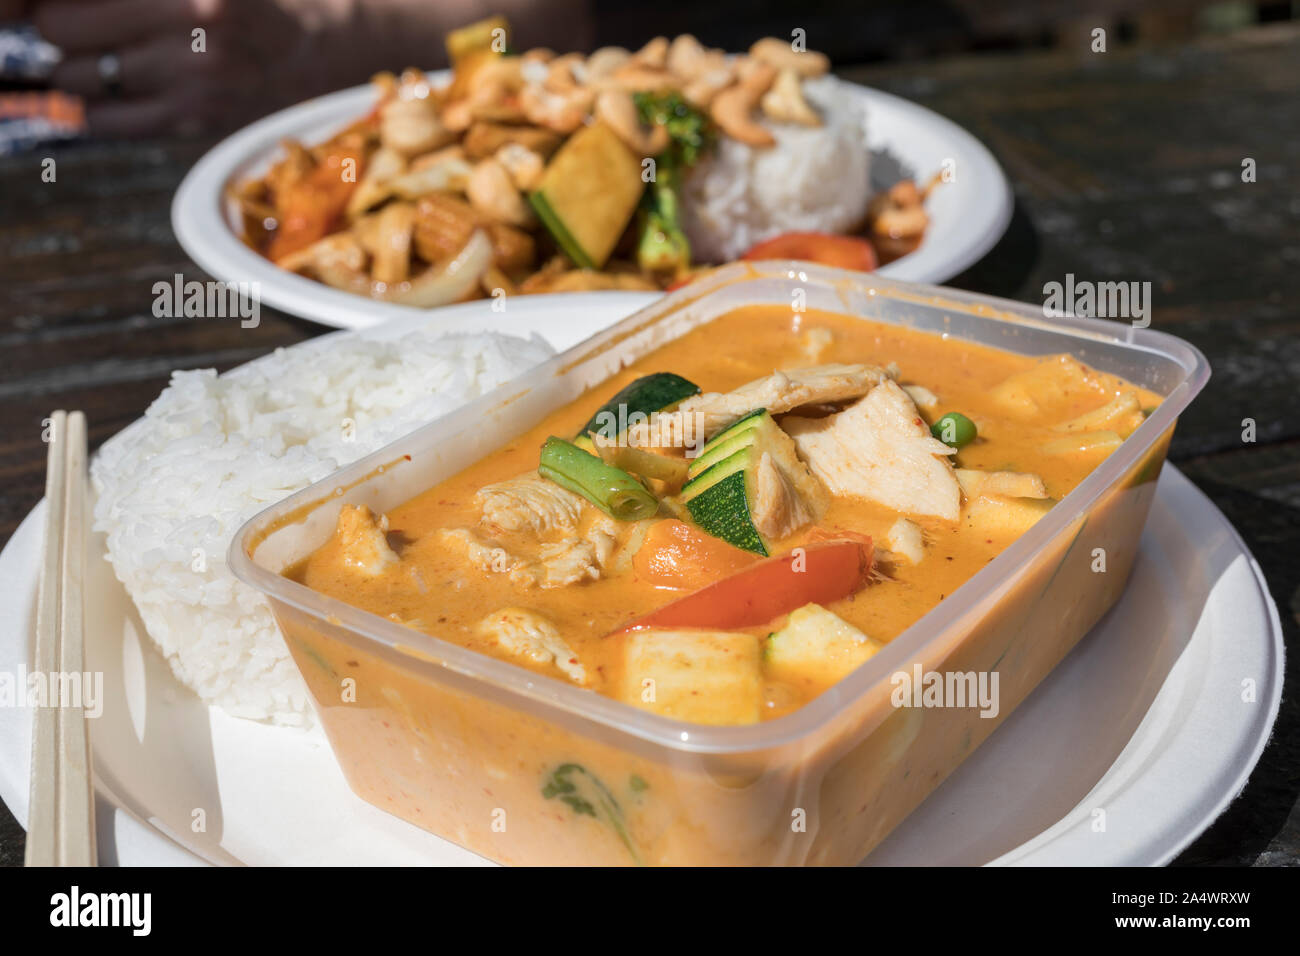 Thai take away food. One dish is in a plastic container and one is ready to eat on a disposable plate in the background. There are some wooden chopsti Stock Photo